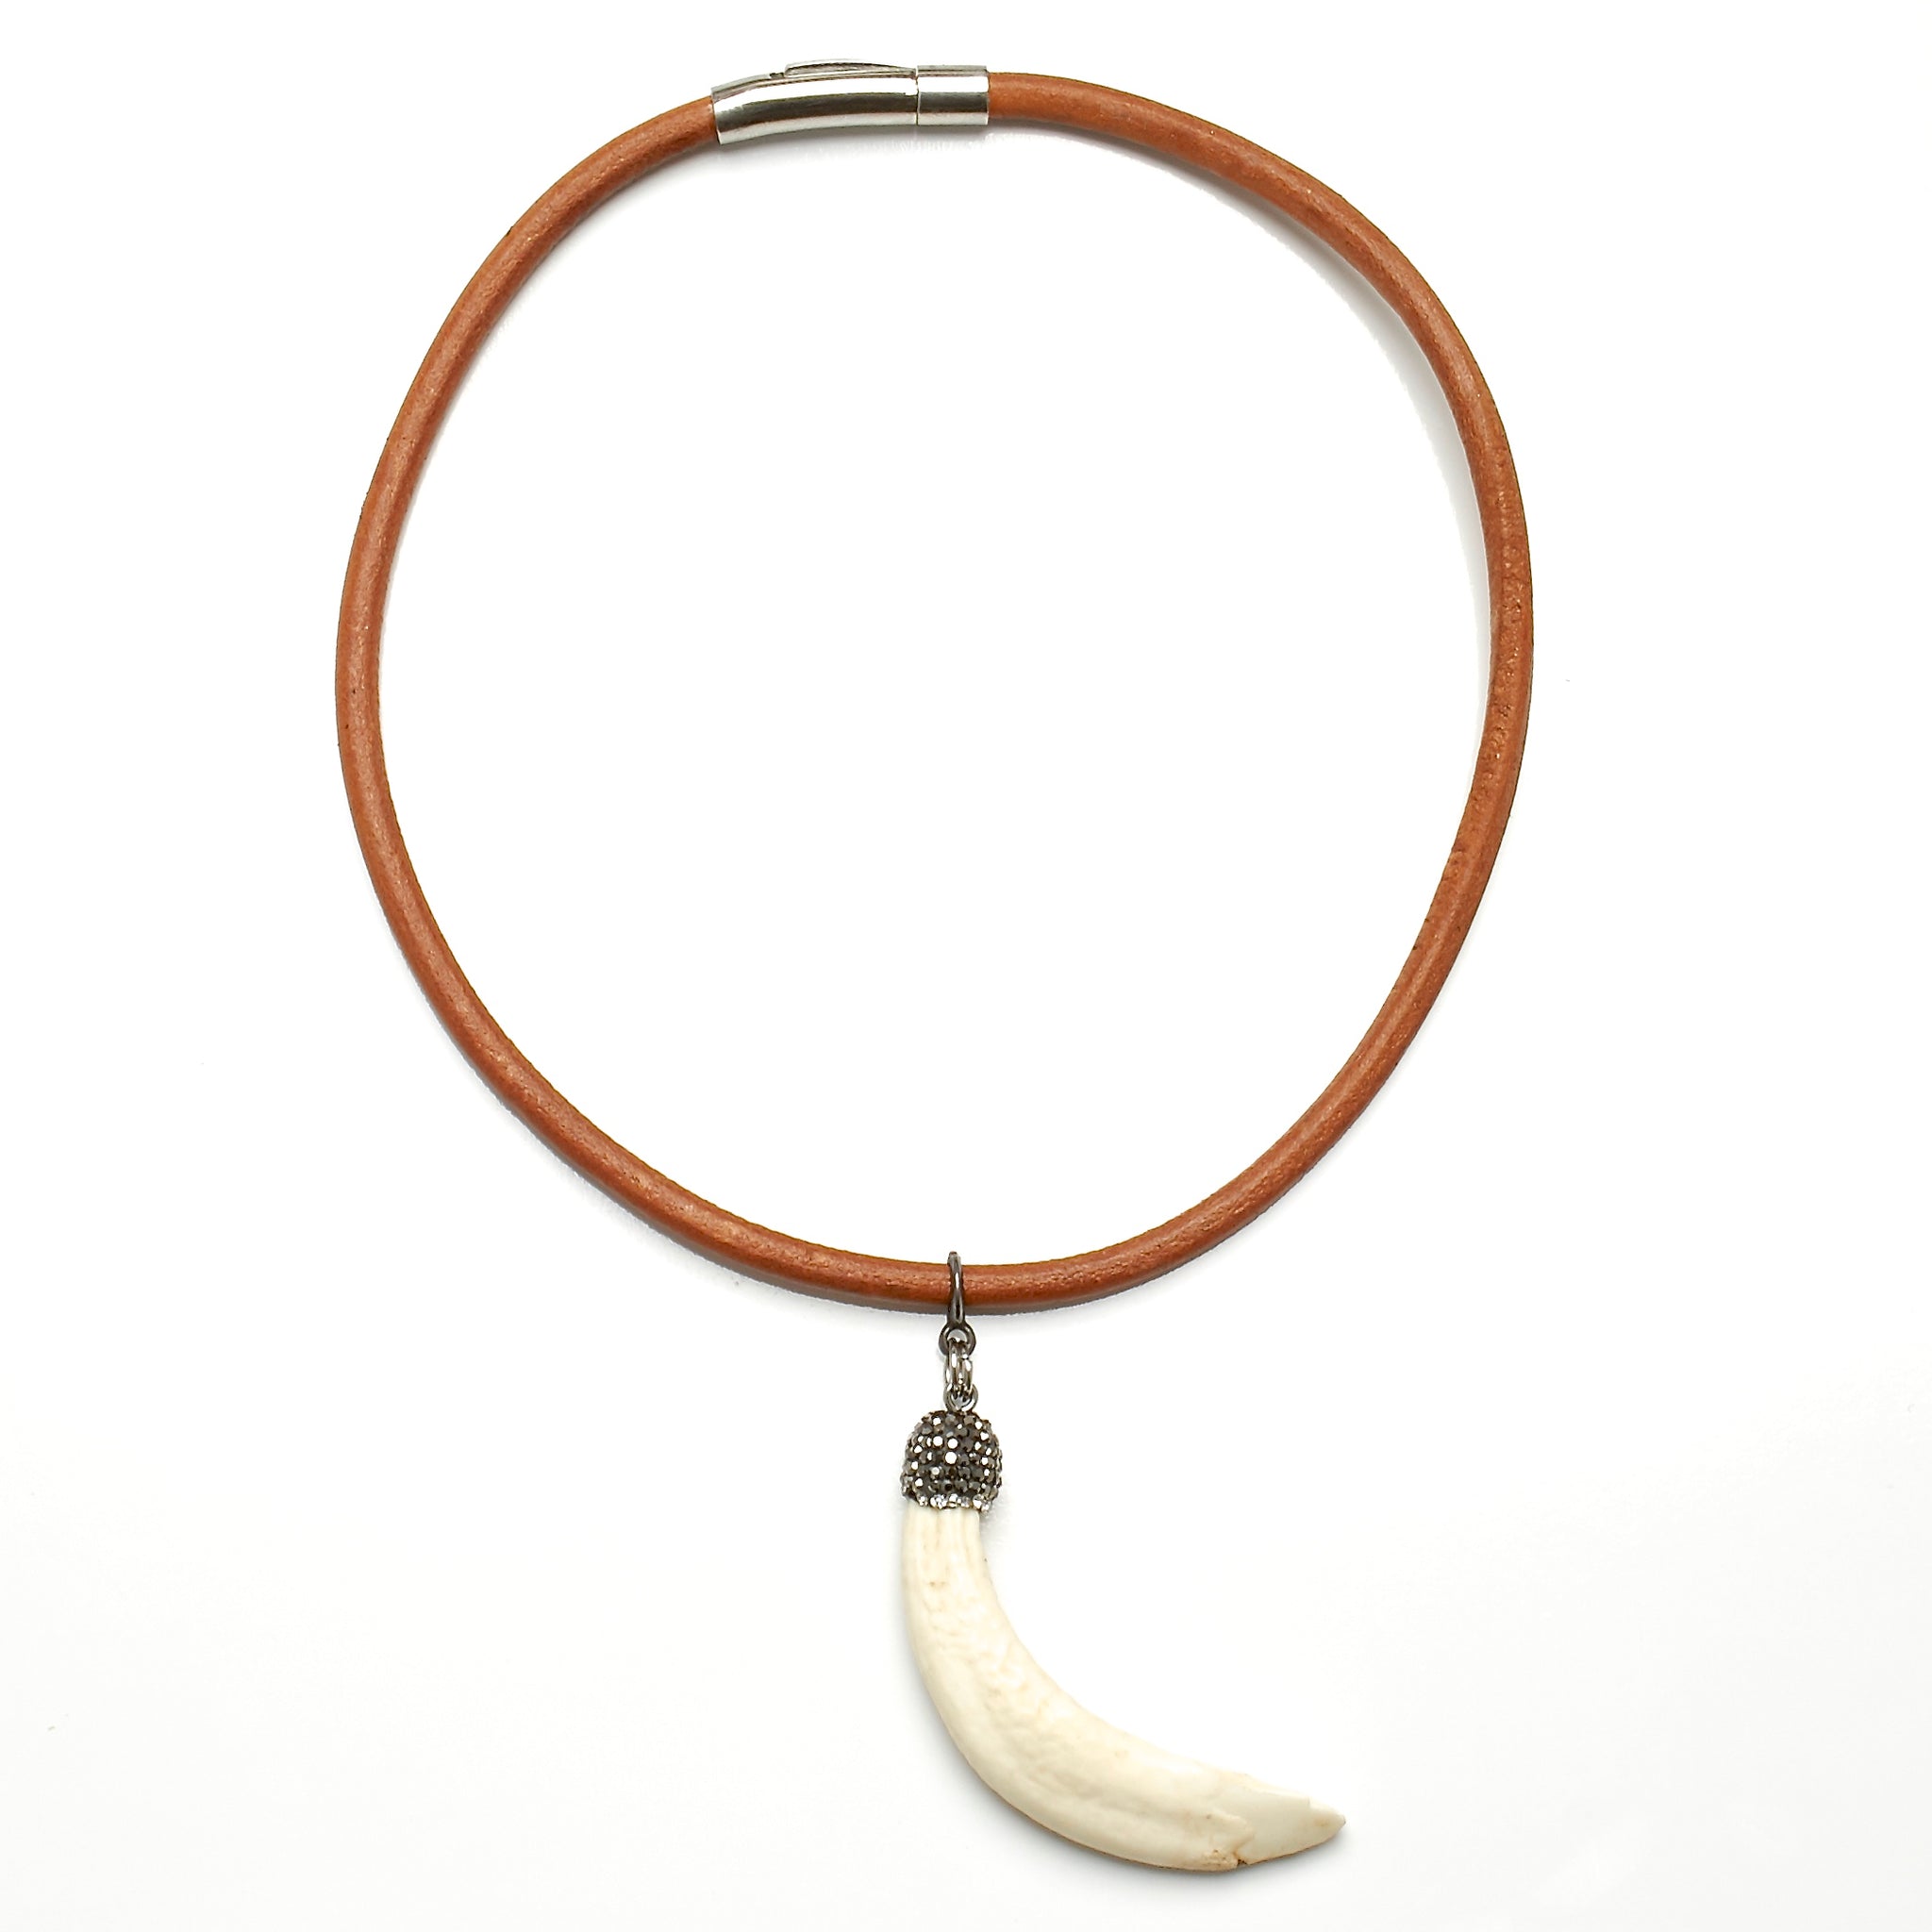 5 MM ROUND LEATHER NECKLACE WITH WILD BOAR'S TOOTH PENDANT AND RHINESTONES. by nyet jewelry.